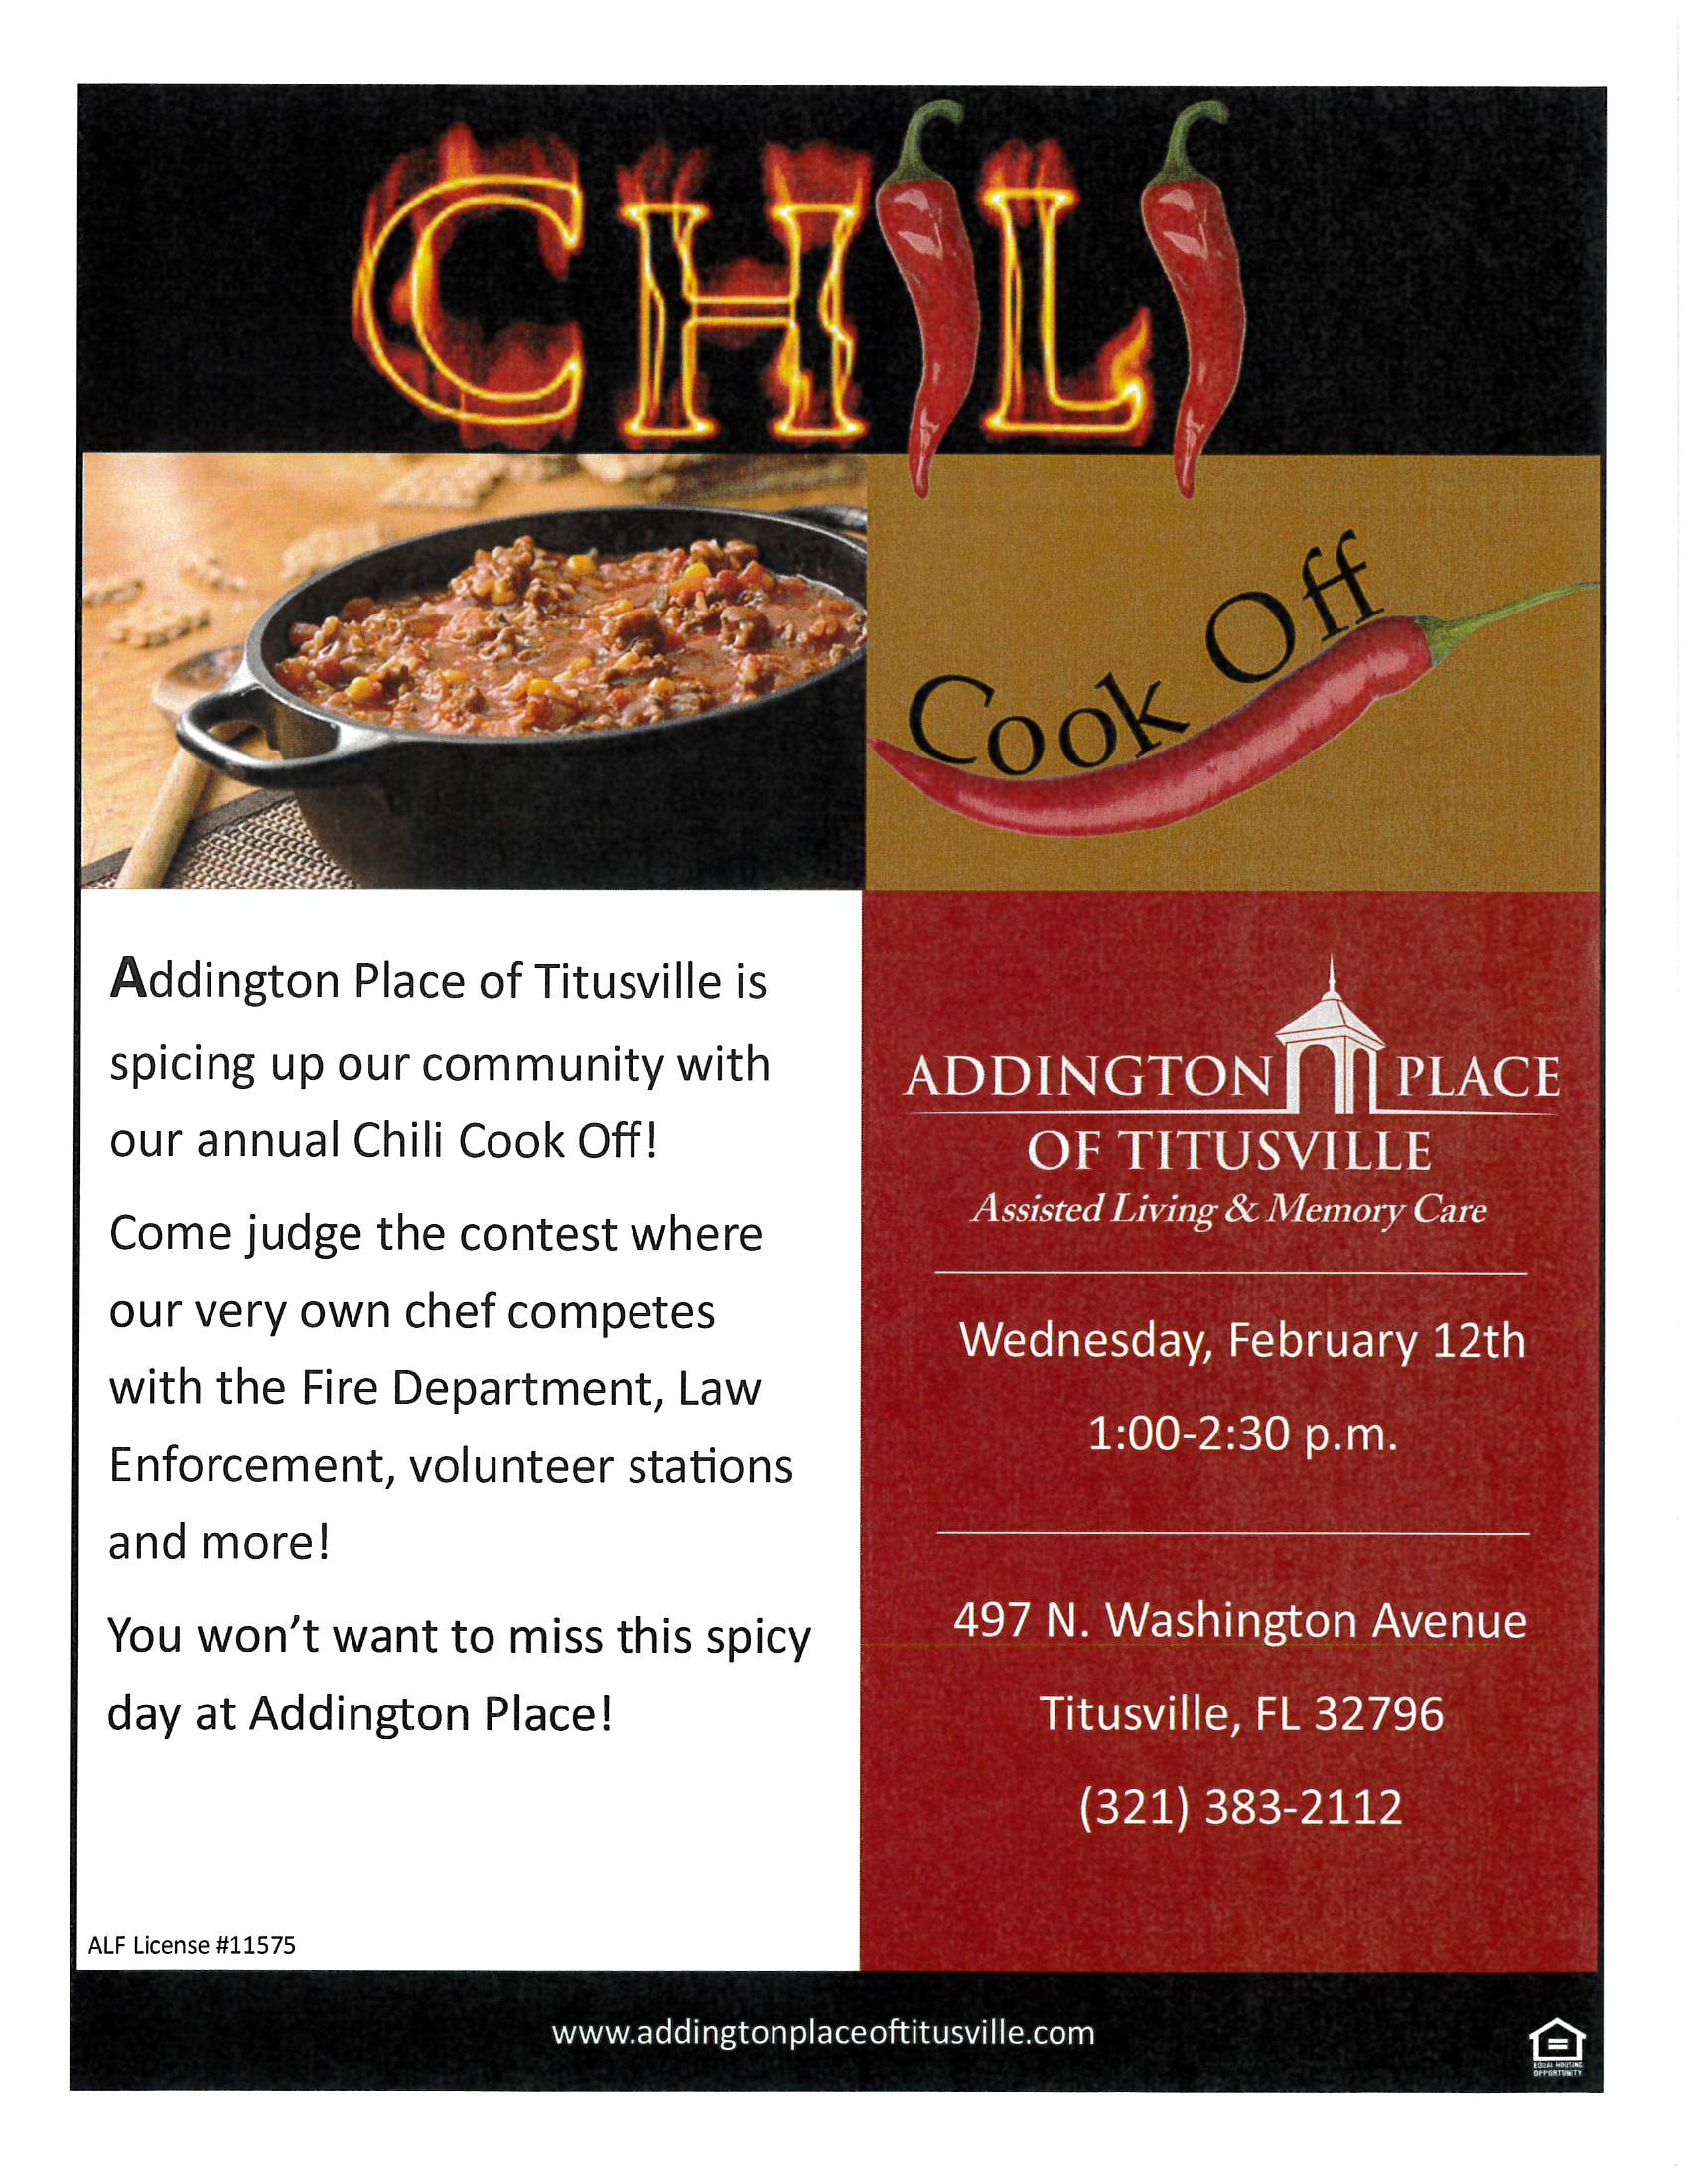 'Chili Cook Off' at Addington Place of Titusville